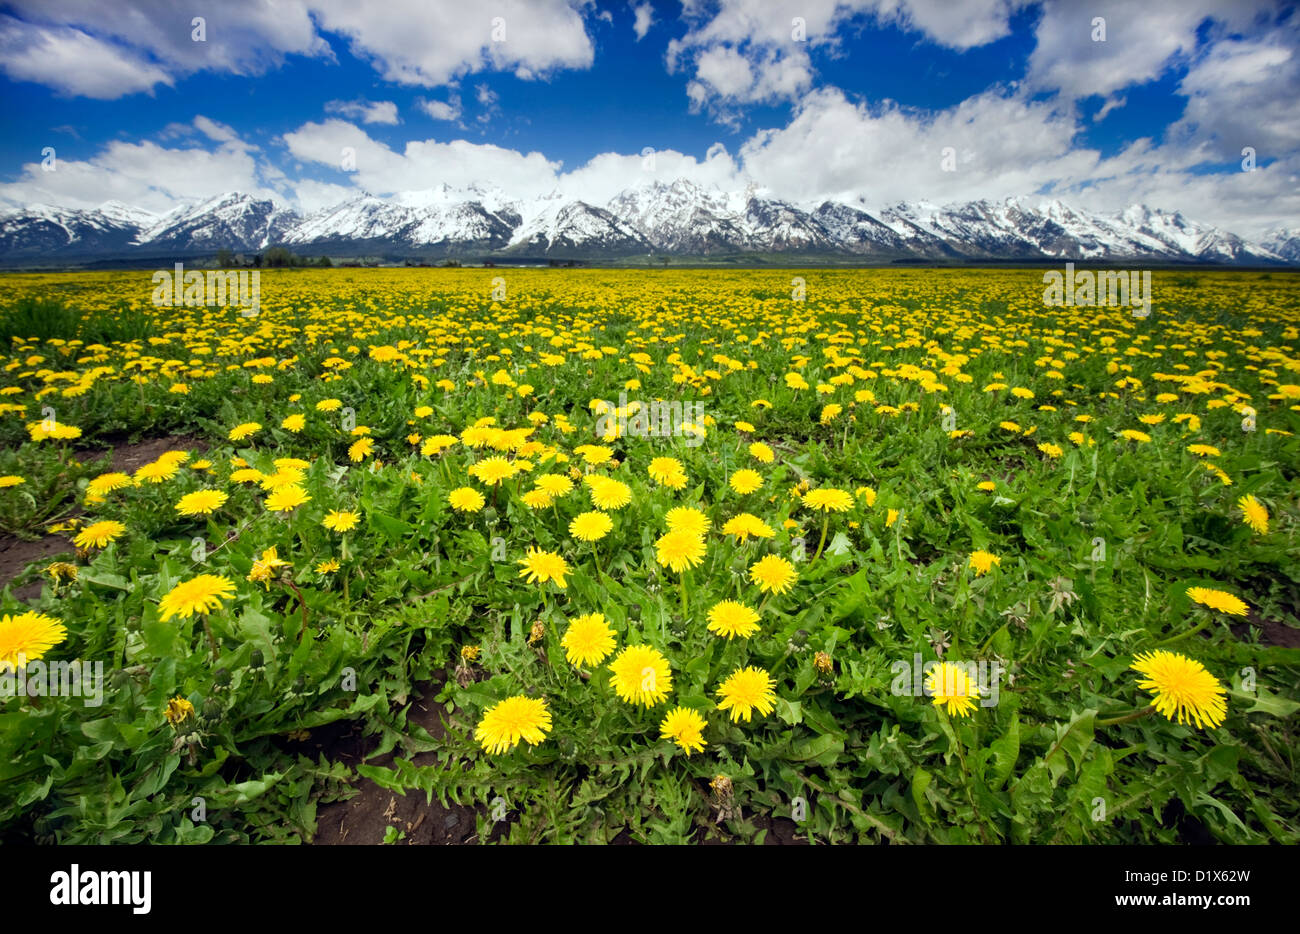 A large field of wildflowers with Grand Teton National Park in the background, Wyoming. Stock Photo